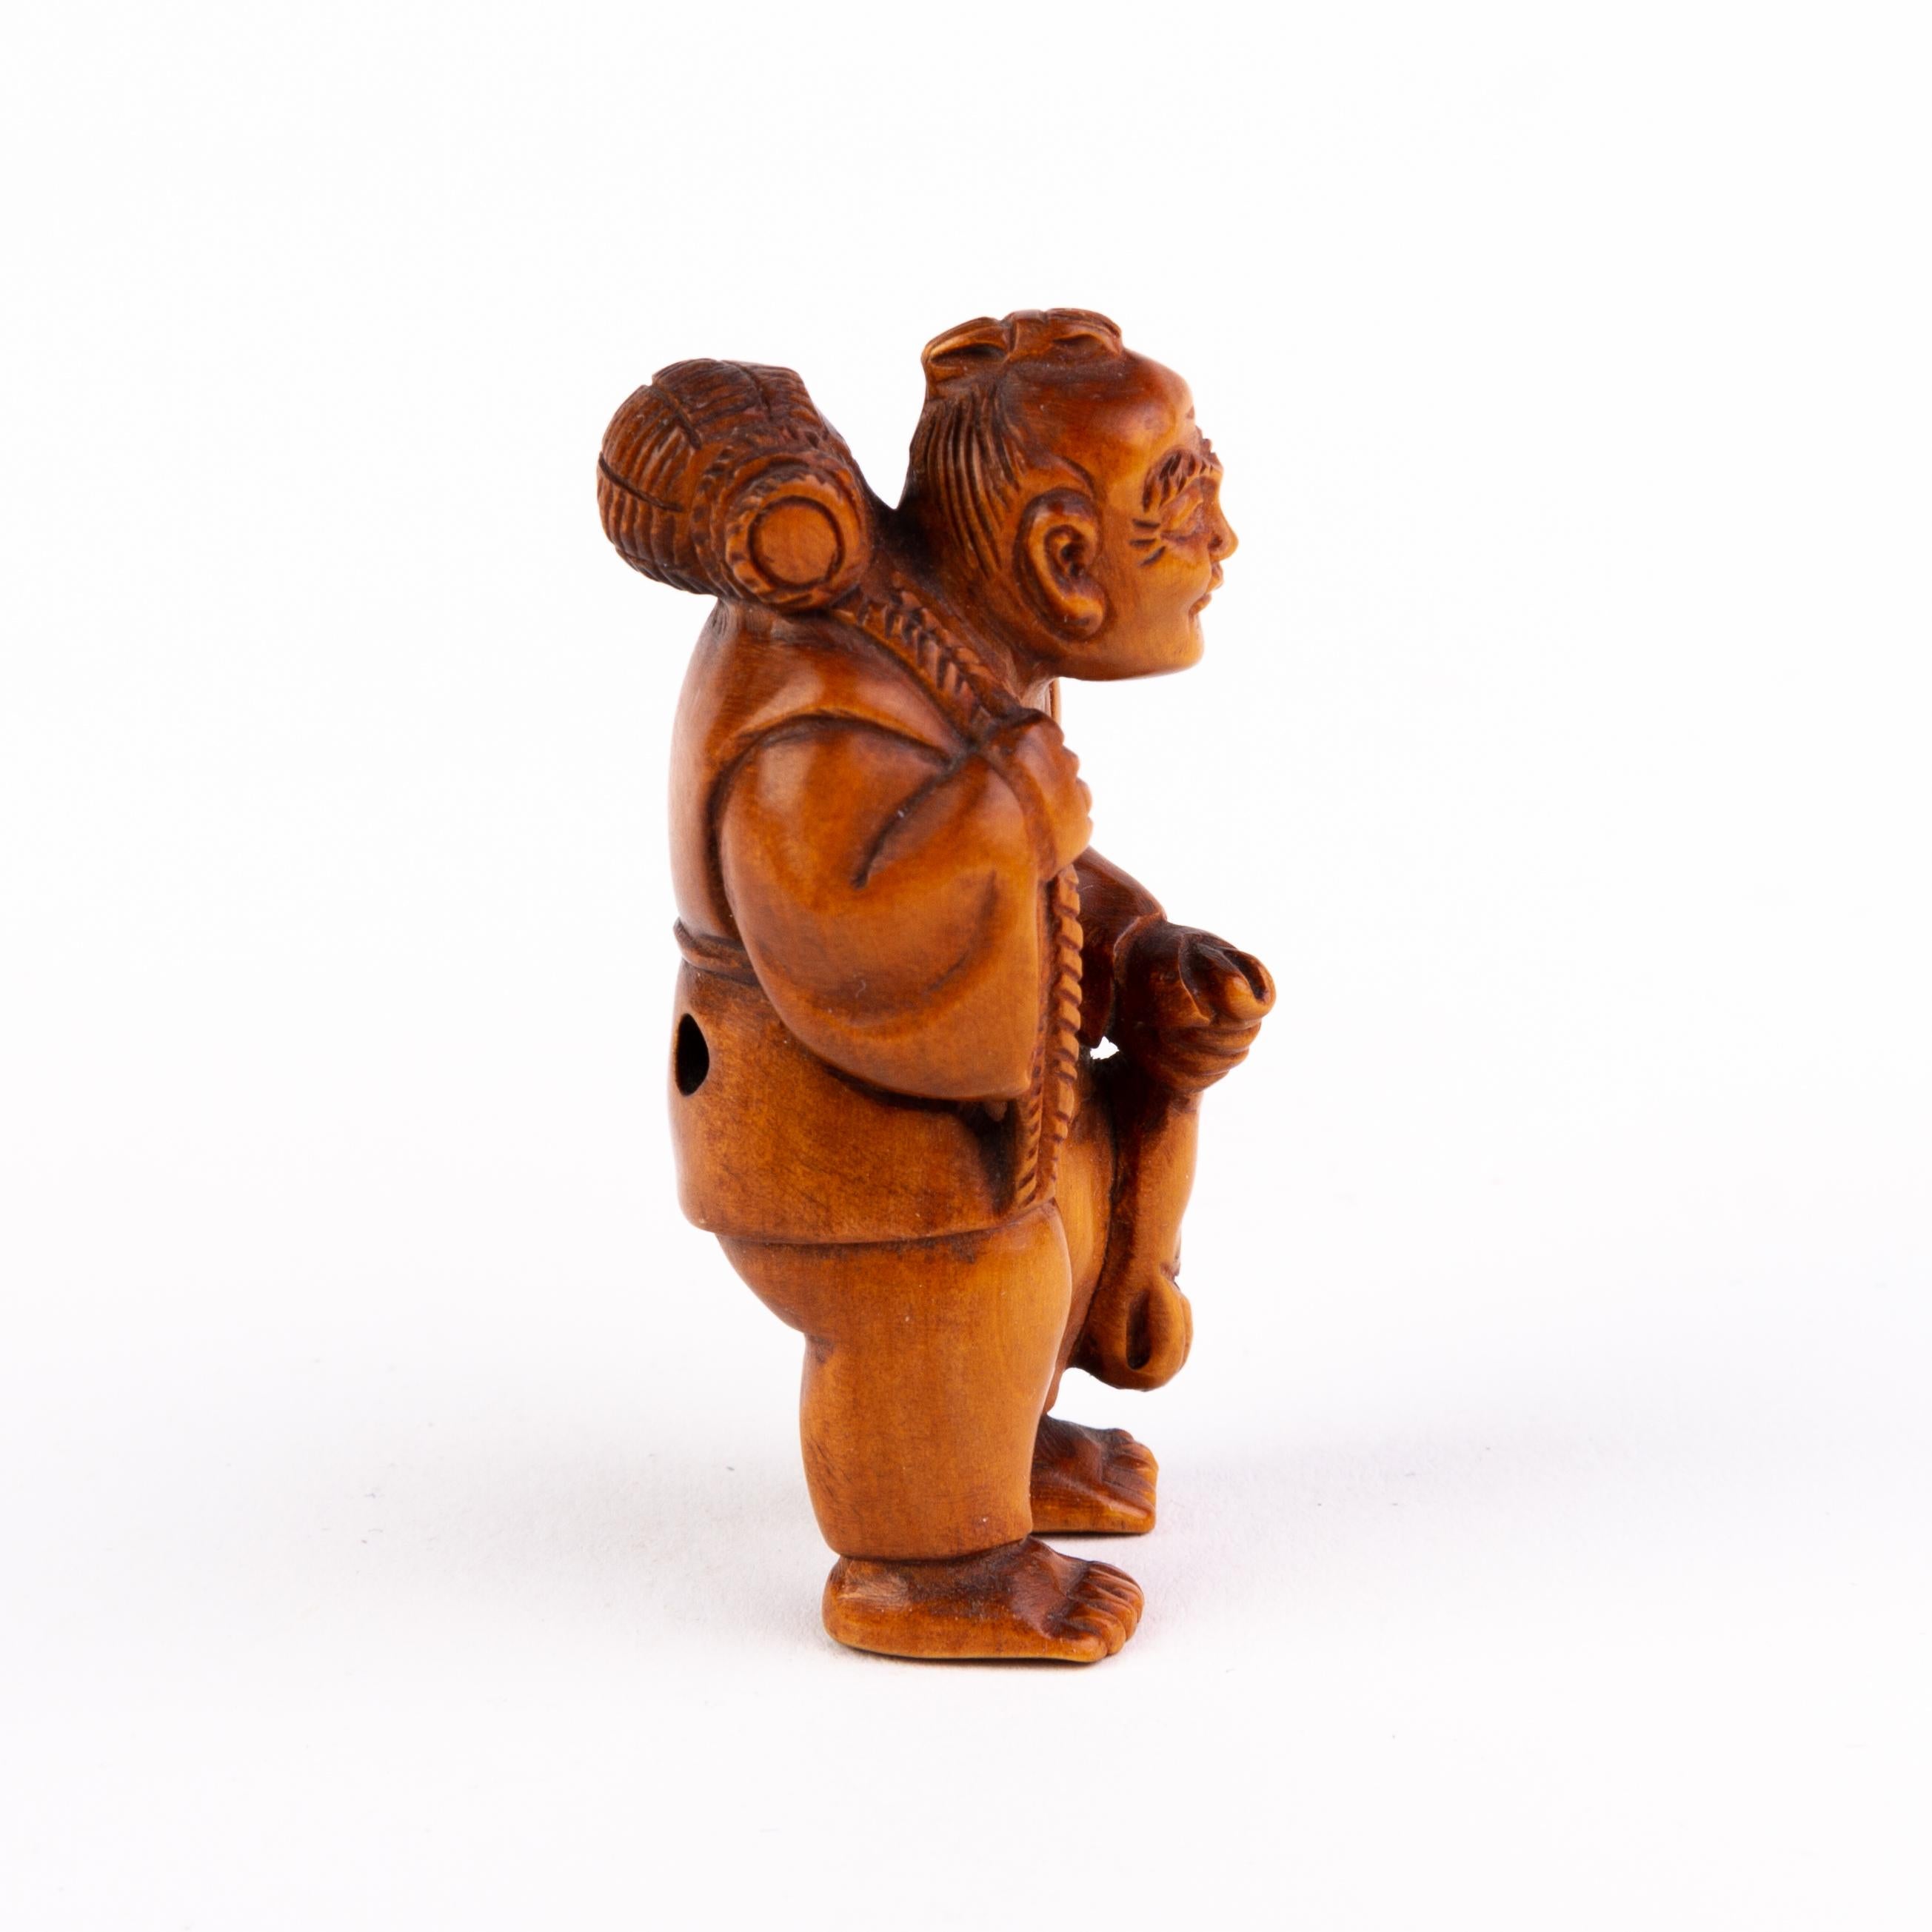 In good condition
From a private collection
Free international shipping
Signed Japanese Boxwood Netsuke Inro of a Fisherman 